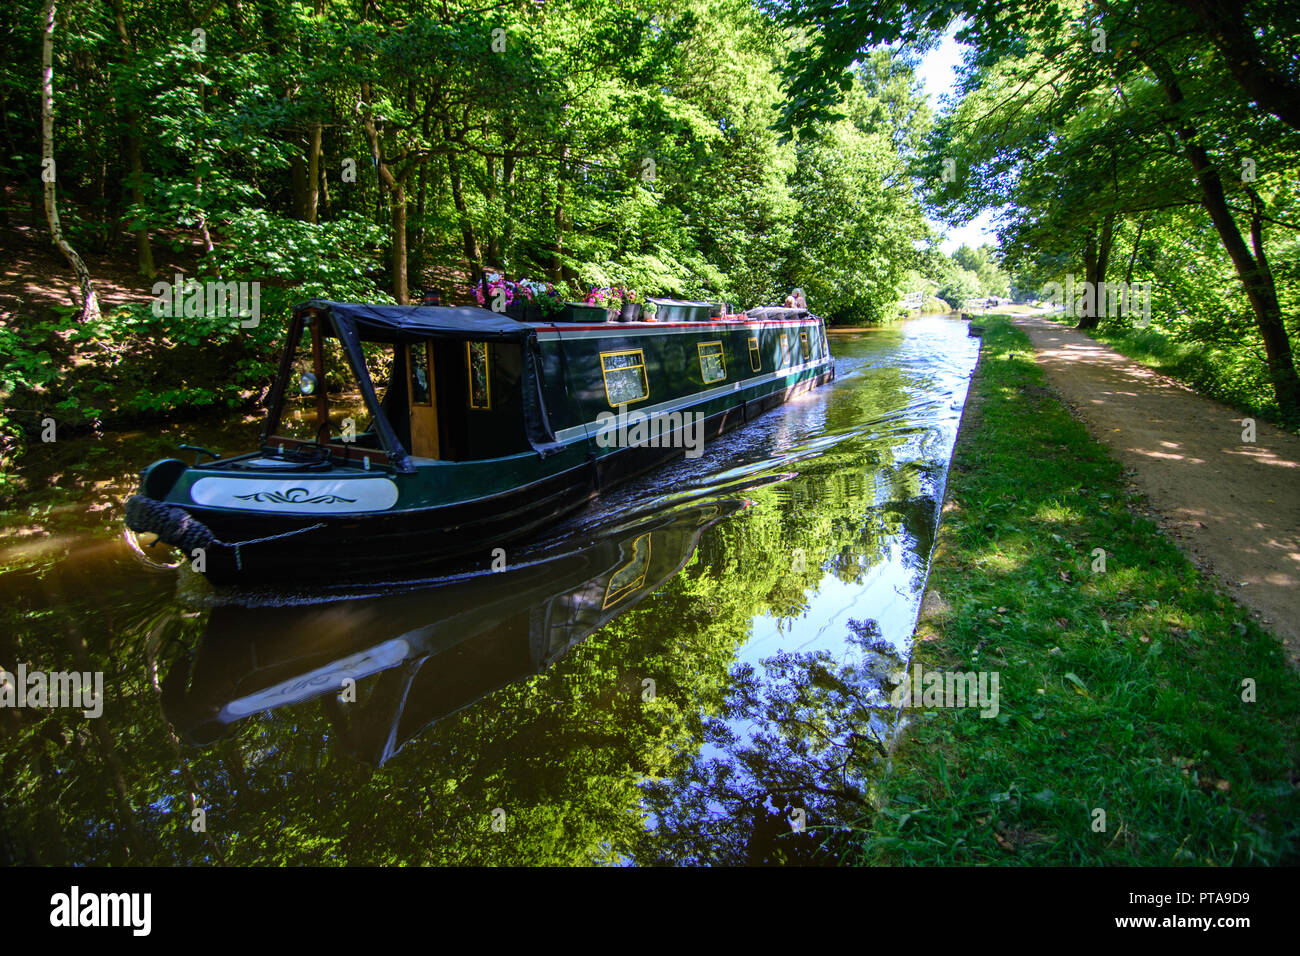 Shipley, England - June 30, 2015: A traditional narrowboat passes through the shade of woodland along the Leeds and Liverpool Canal at Shipley near Br Stock Photo